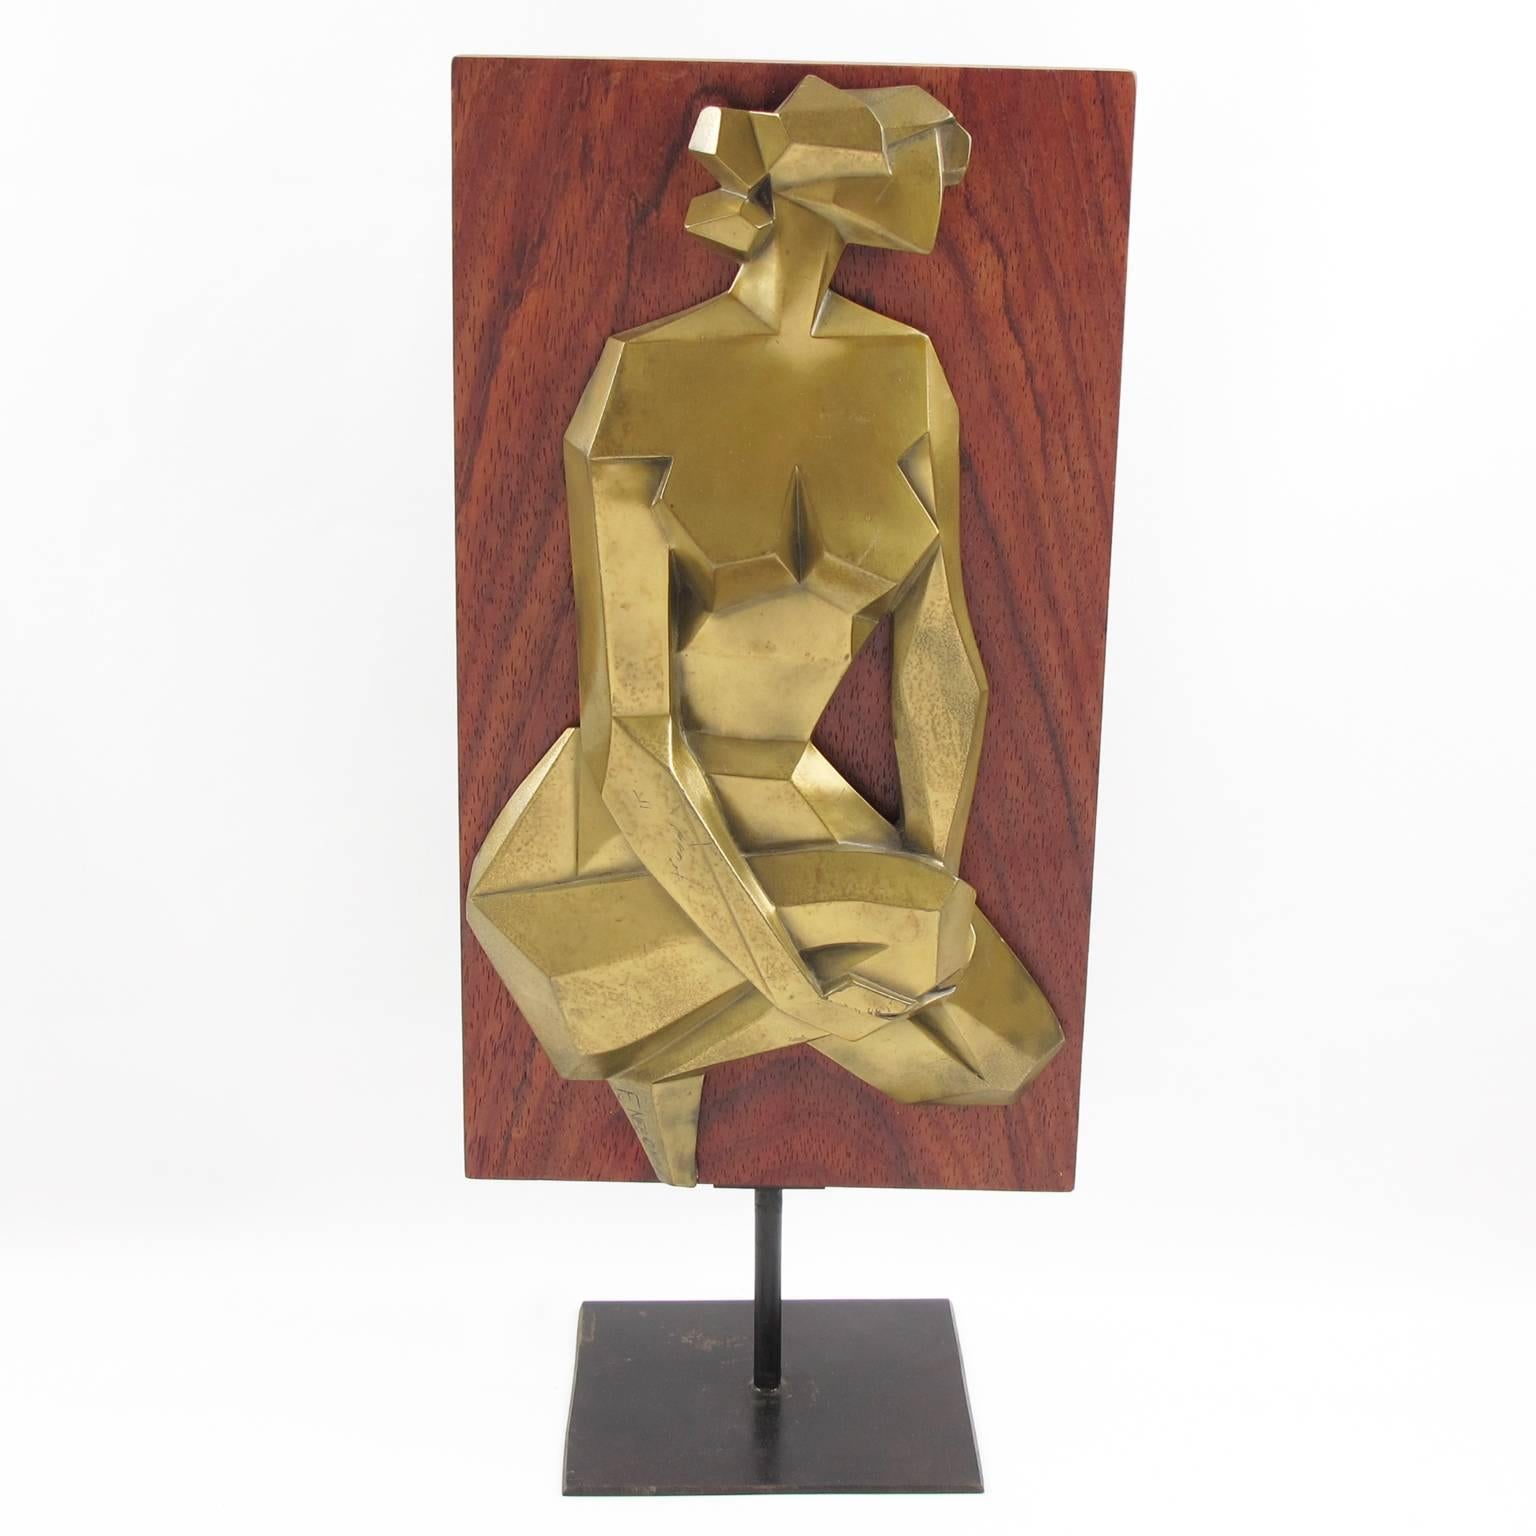 Modernist nude bronze relief sculpture by Giovanni Schoeman from his London period (late 1960s-late 1970s).
Featuring a kneeling nude woman in profile, unusually mounted on a thick rosewood plinth with custom-made black metal base. This Schoeman's